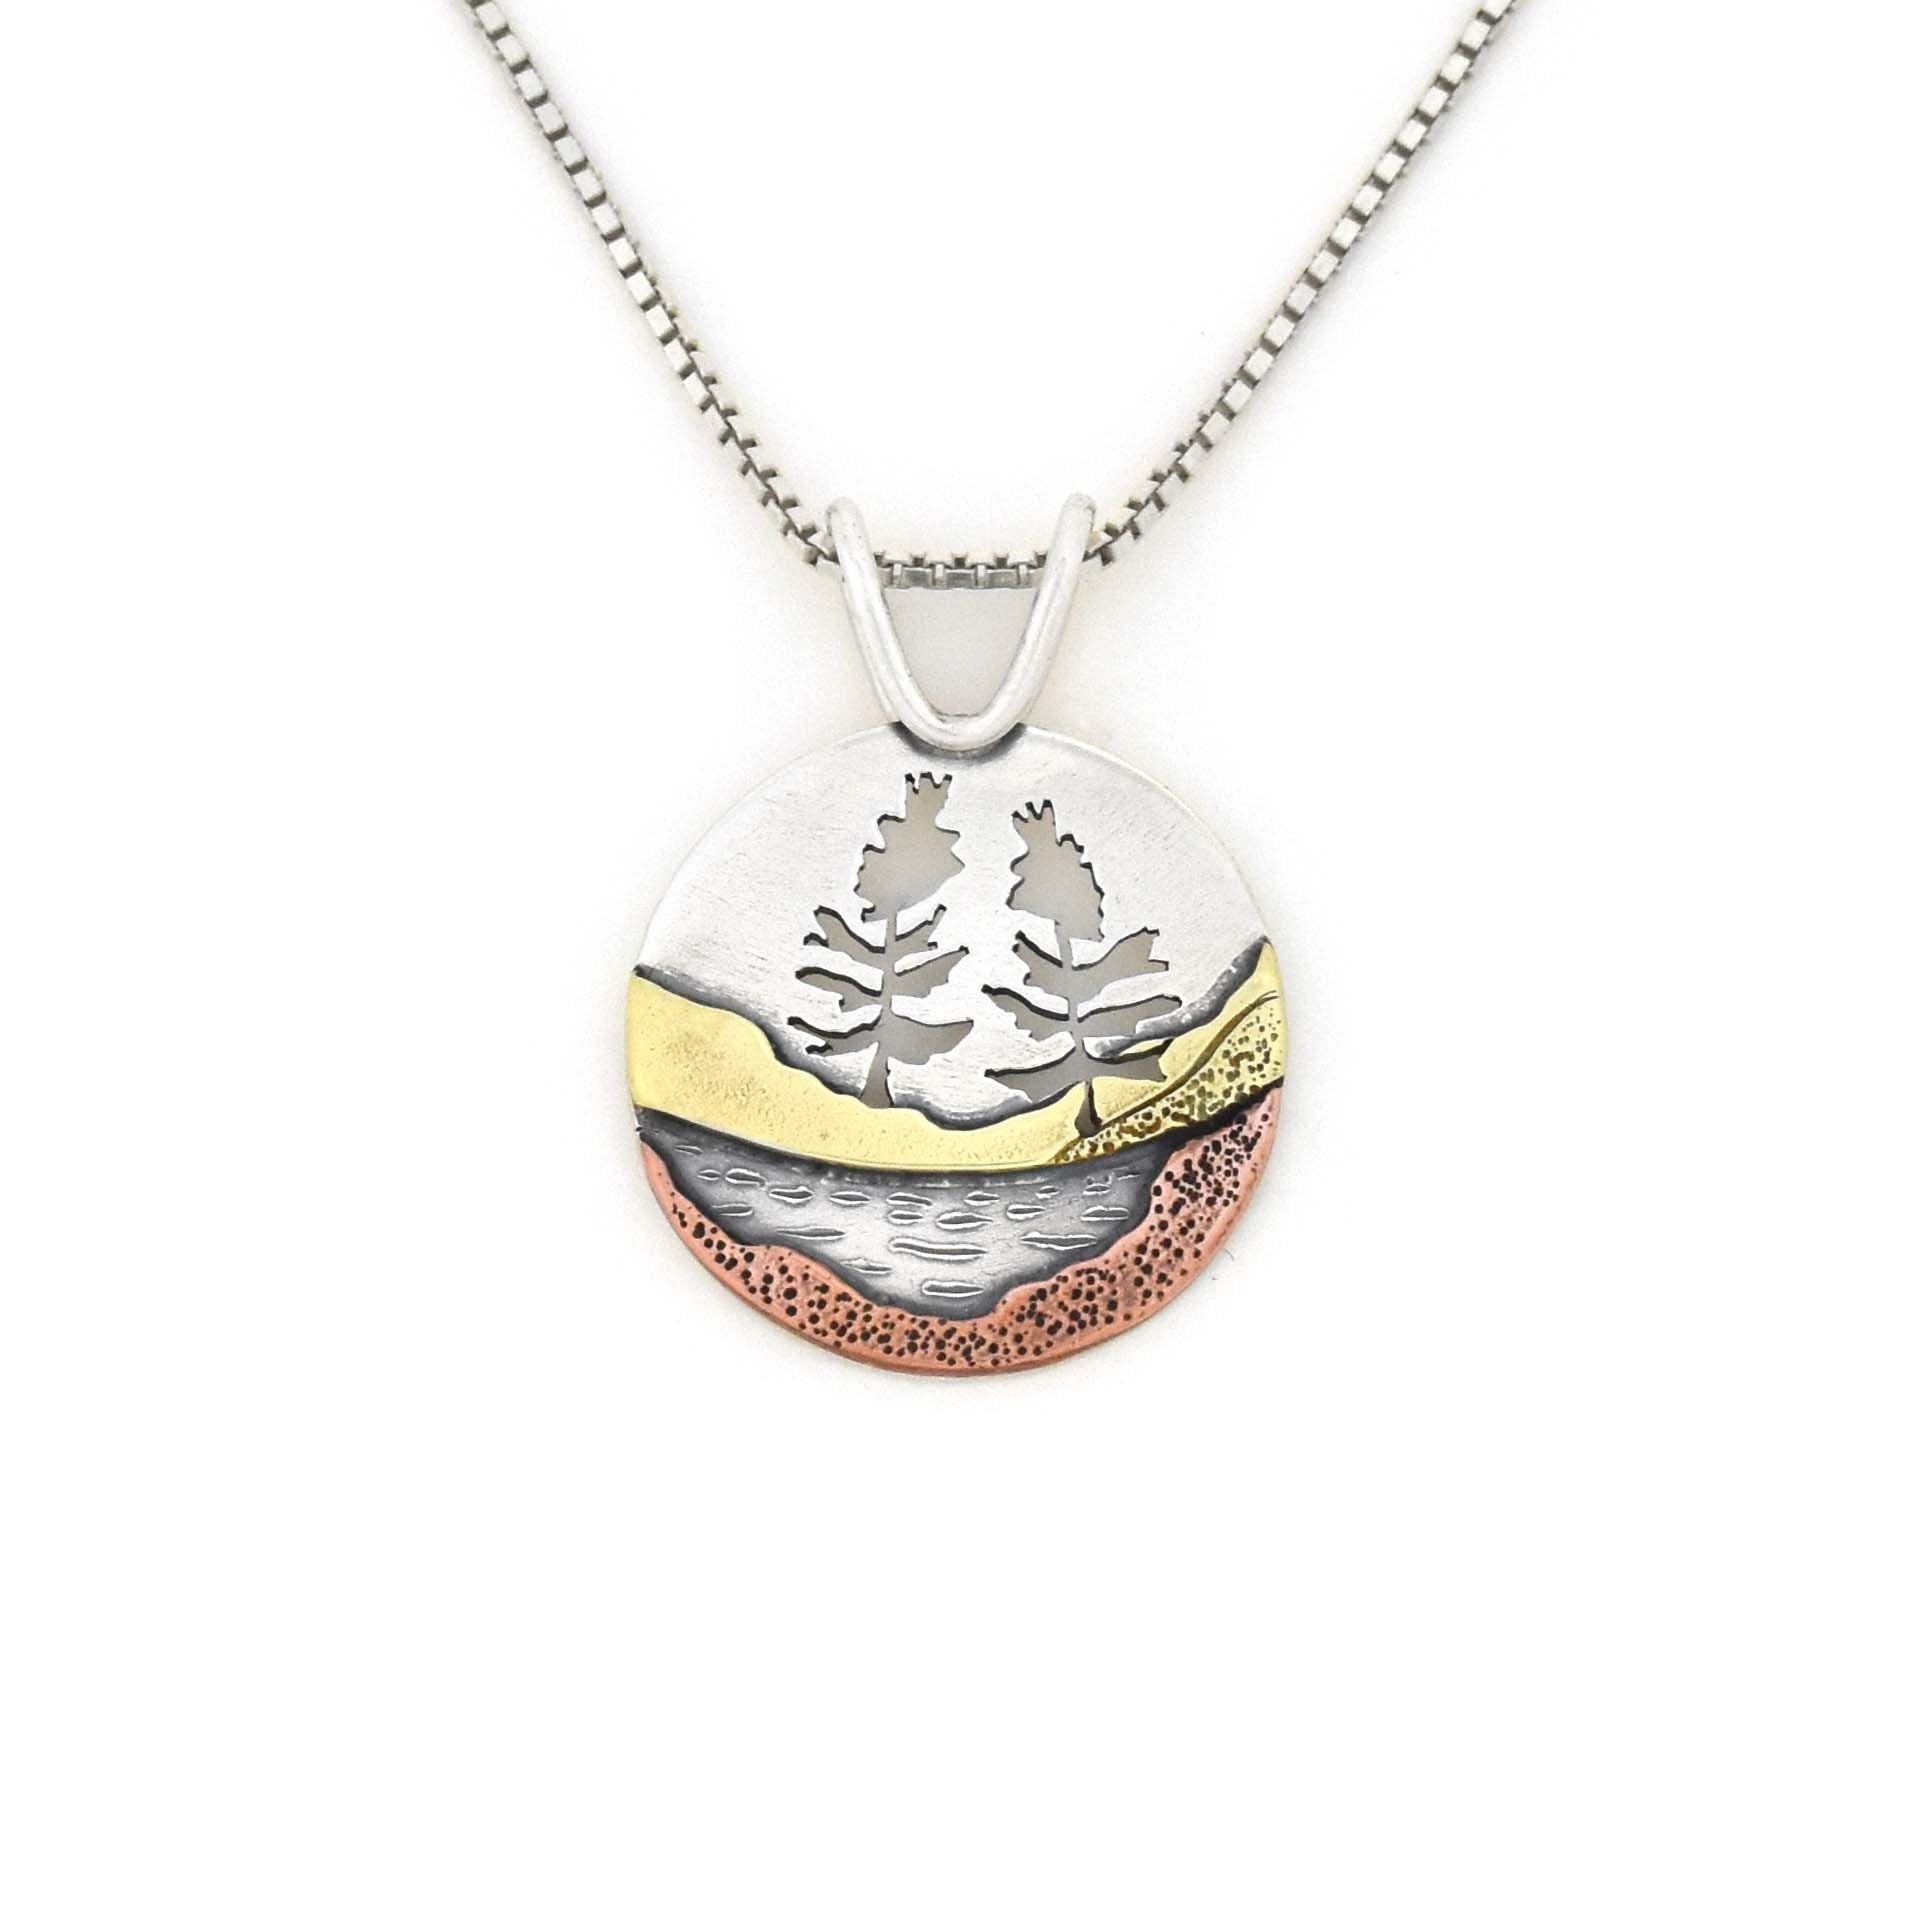 Two Hearted River Pendant - Mixed Metal Pendant   3087 - handmade by Beth Millner Jewelry